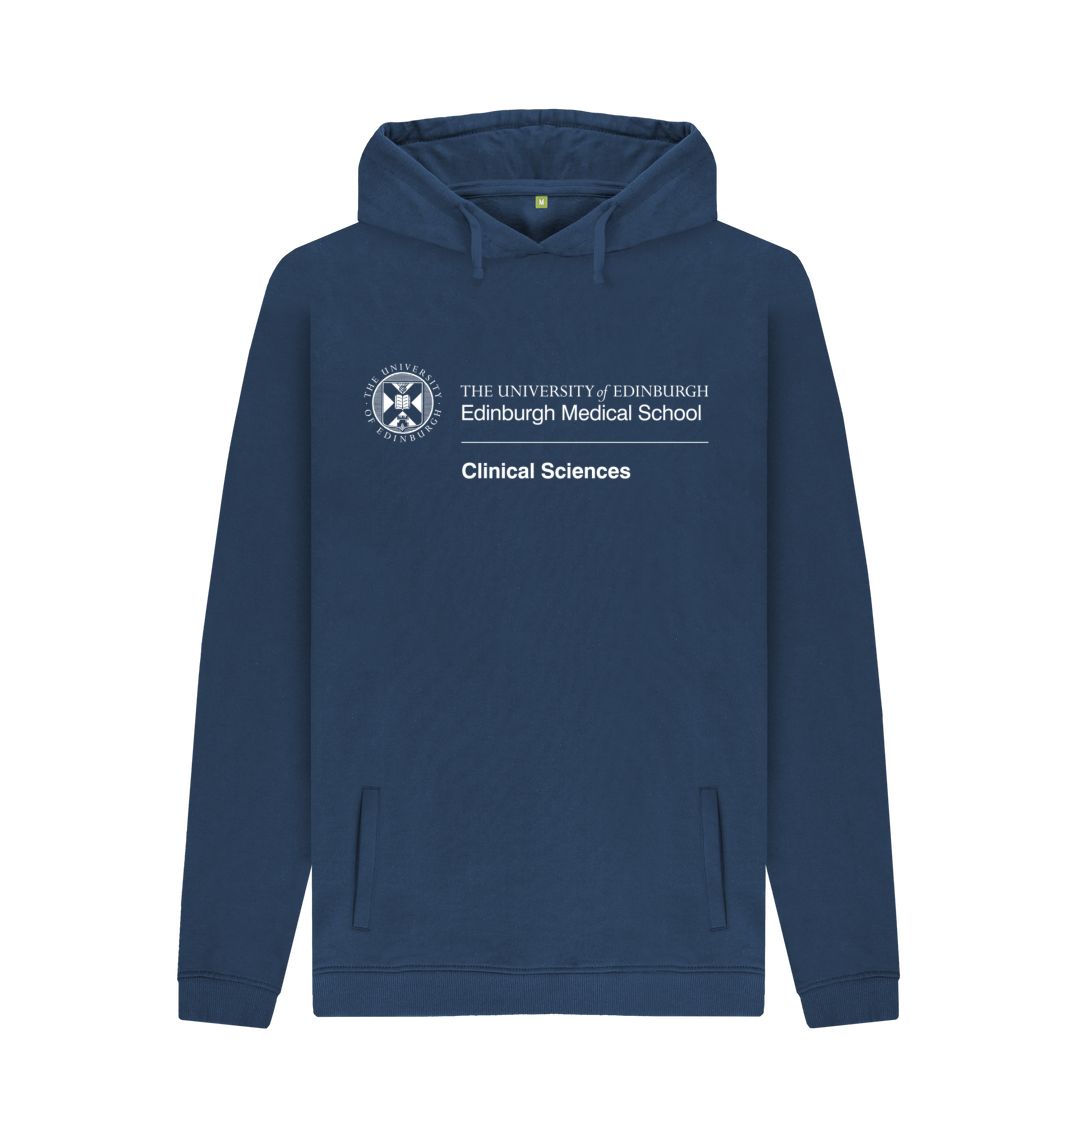 Navy Hoodie with white University crest and text that reads ' University of Edinburgh : Edinburgh Medical School - Clinical Sciences